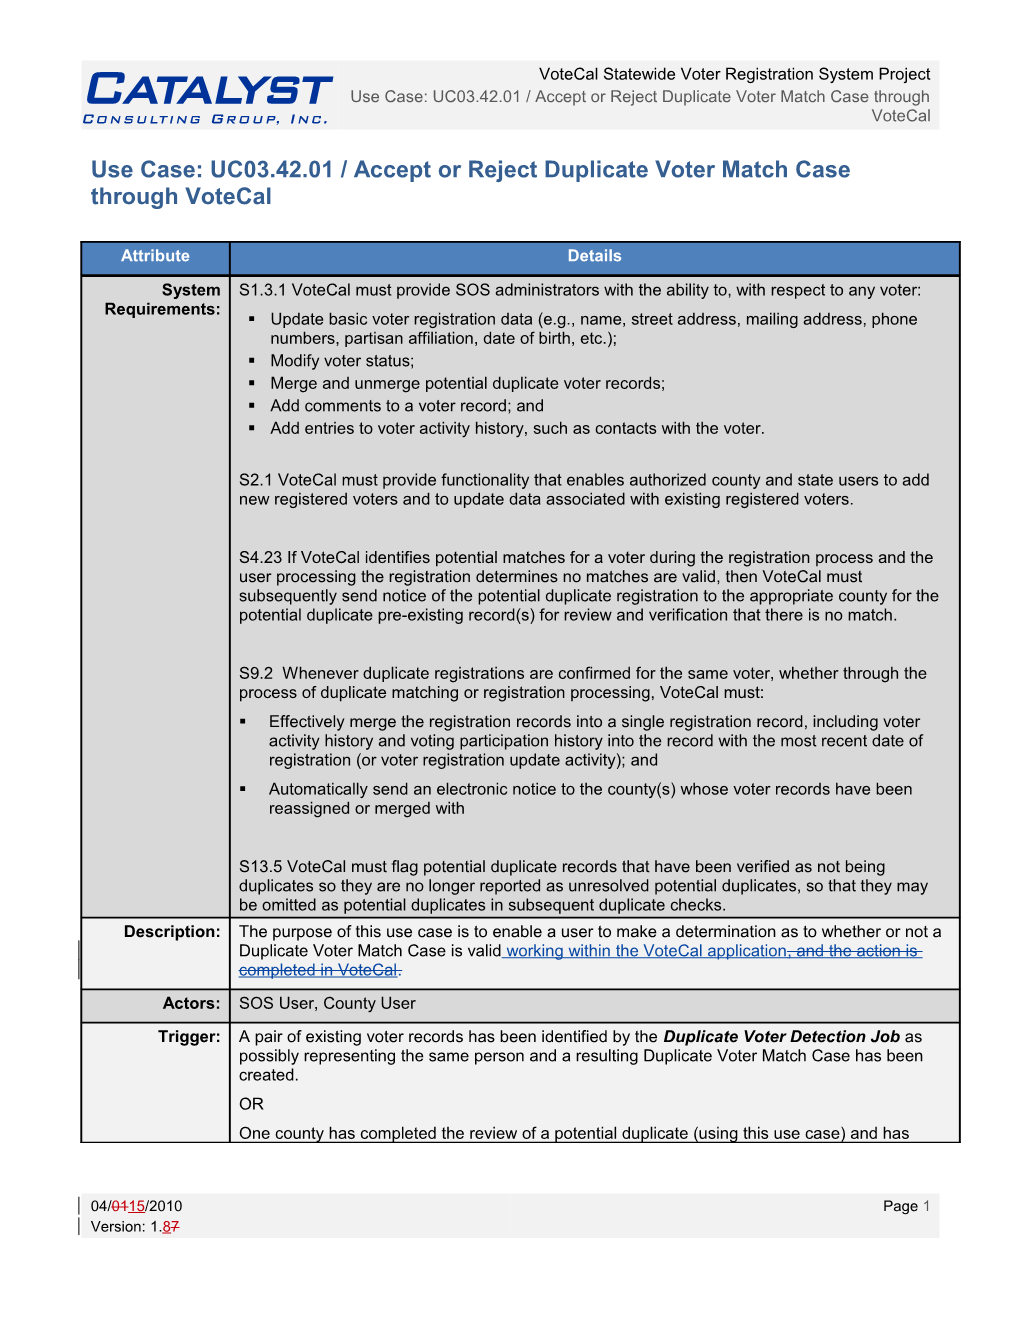 Use Case: UC03.42.01 / Accept Or Reject Duplicate Voter Match Case Through Votecal